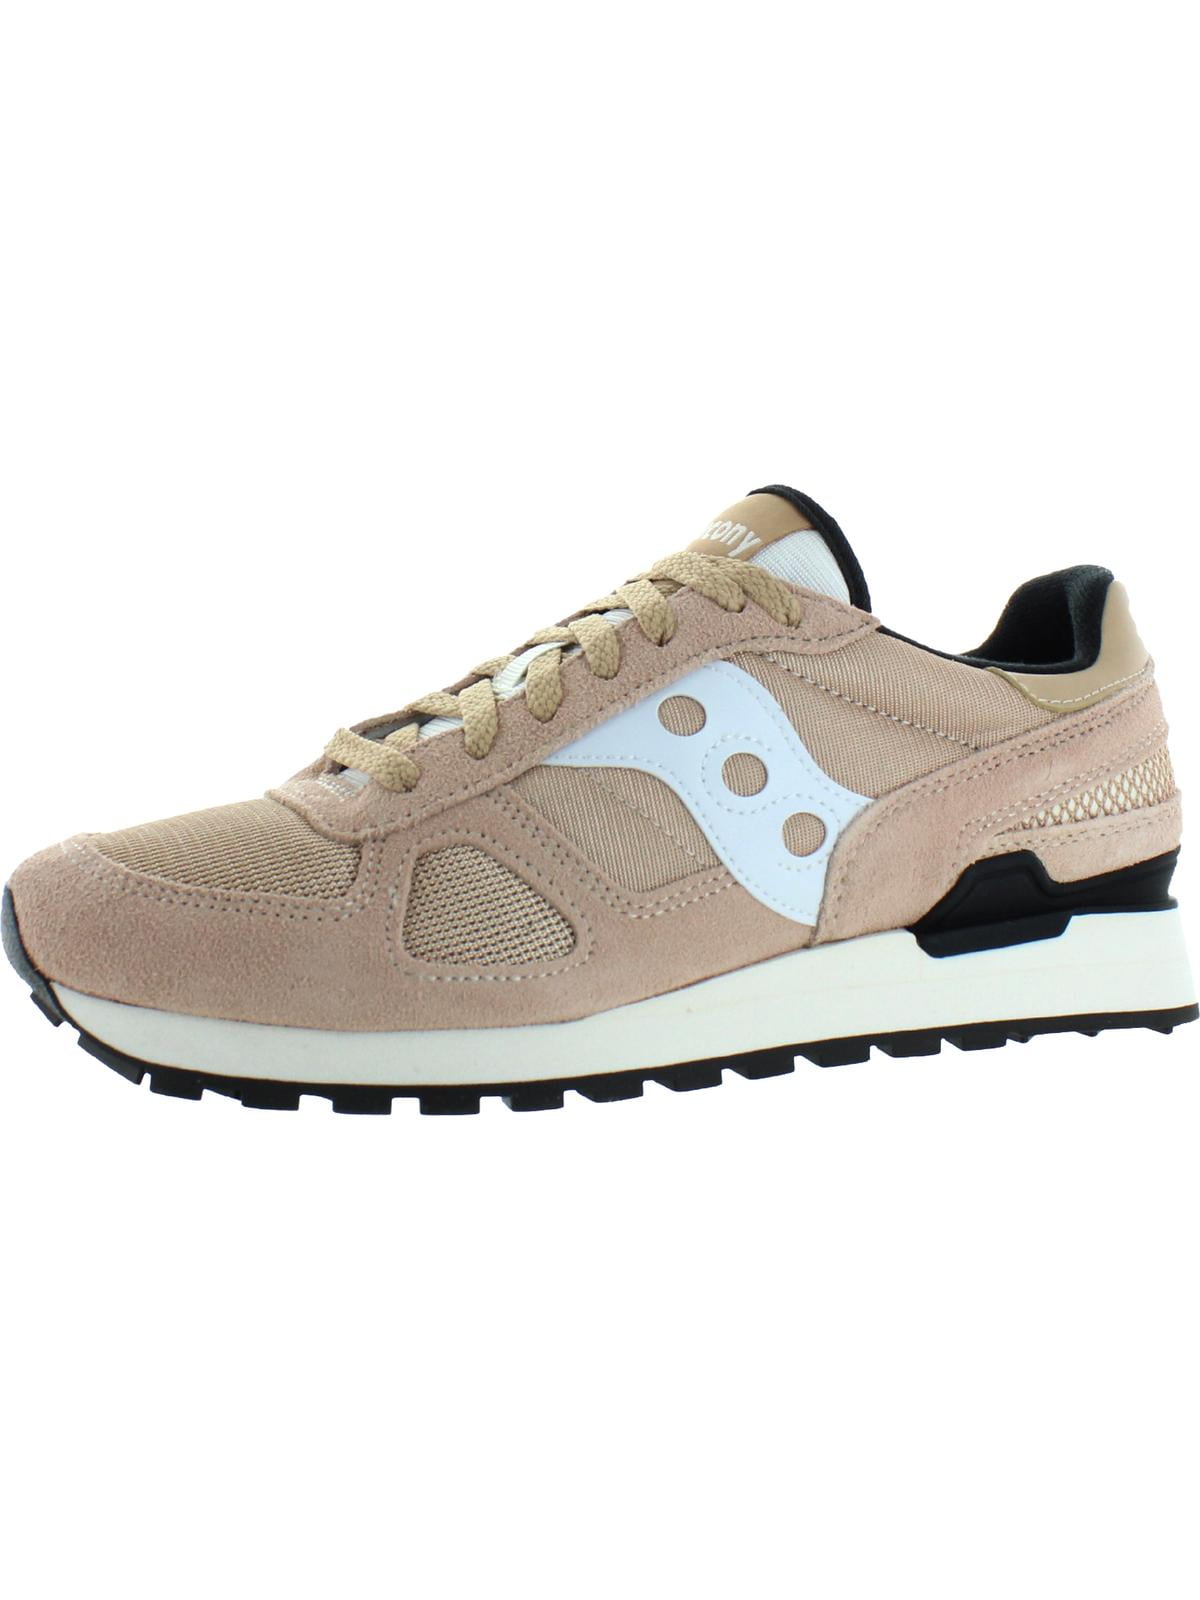 Saucony Mens Shadow Original Trainers Suede Comfort Sneakers Shoes BHFO 0431 